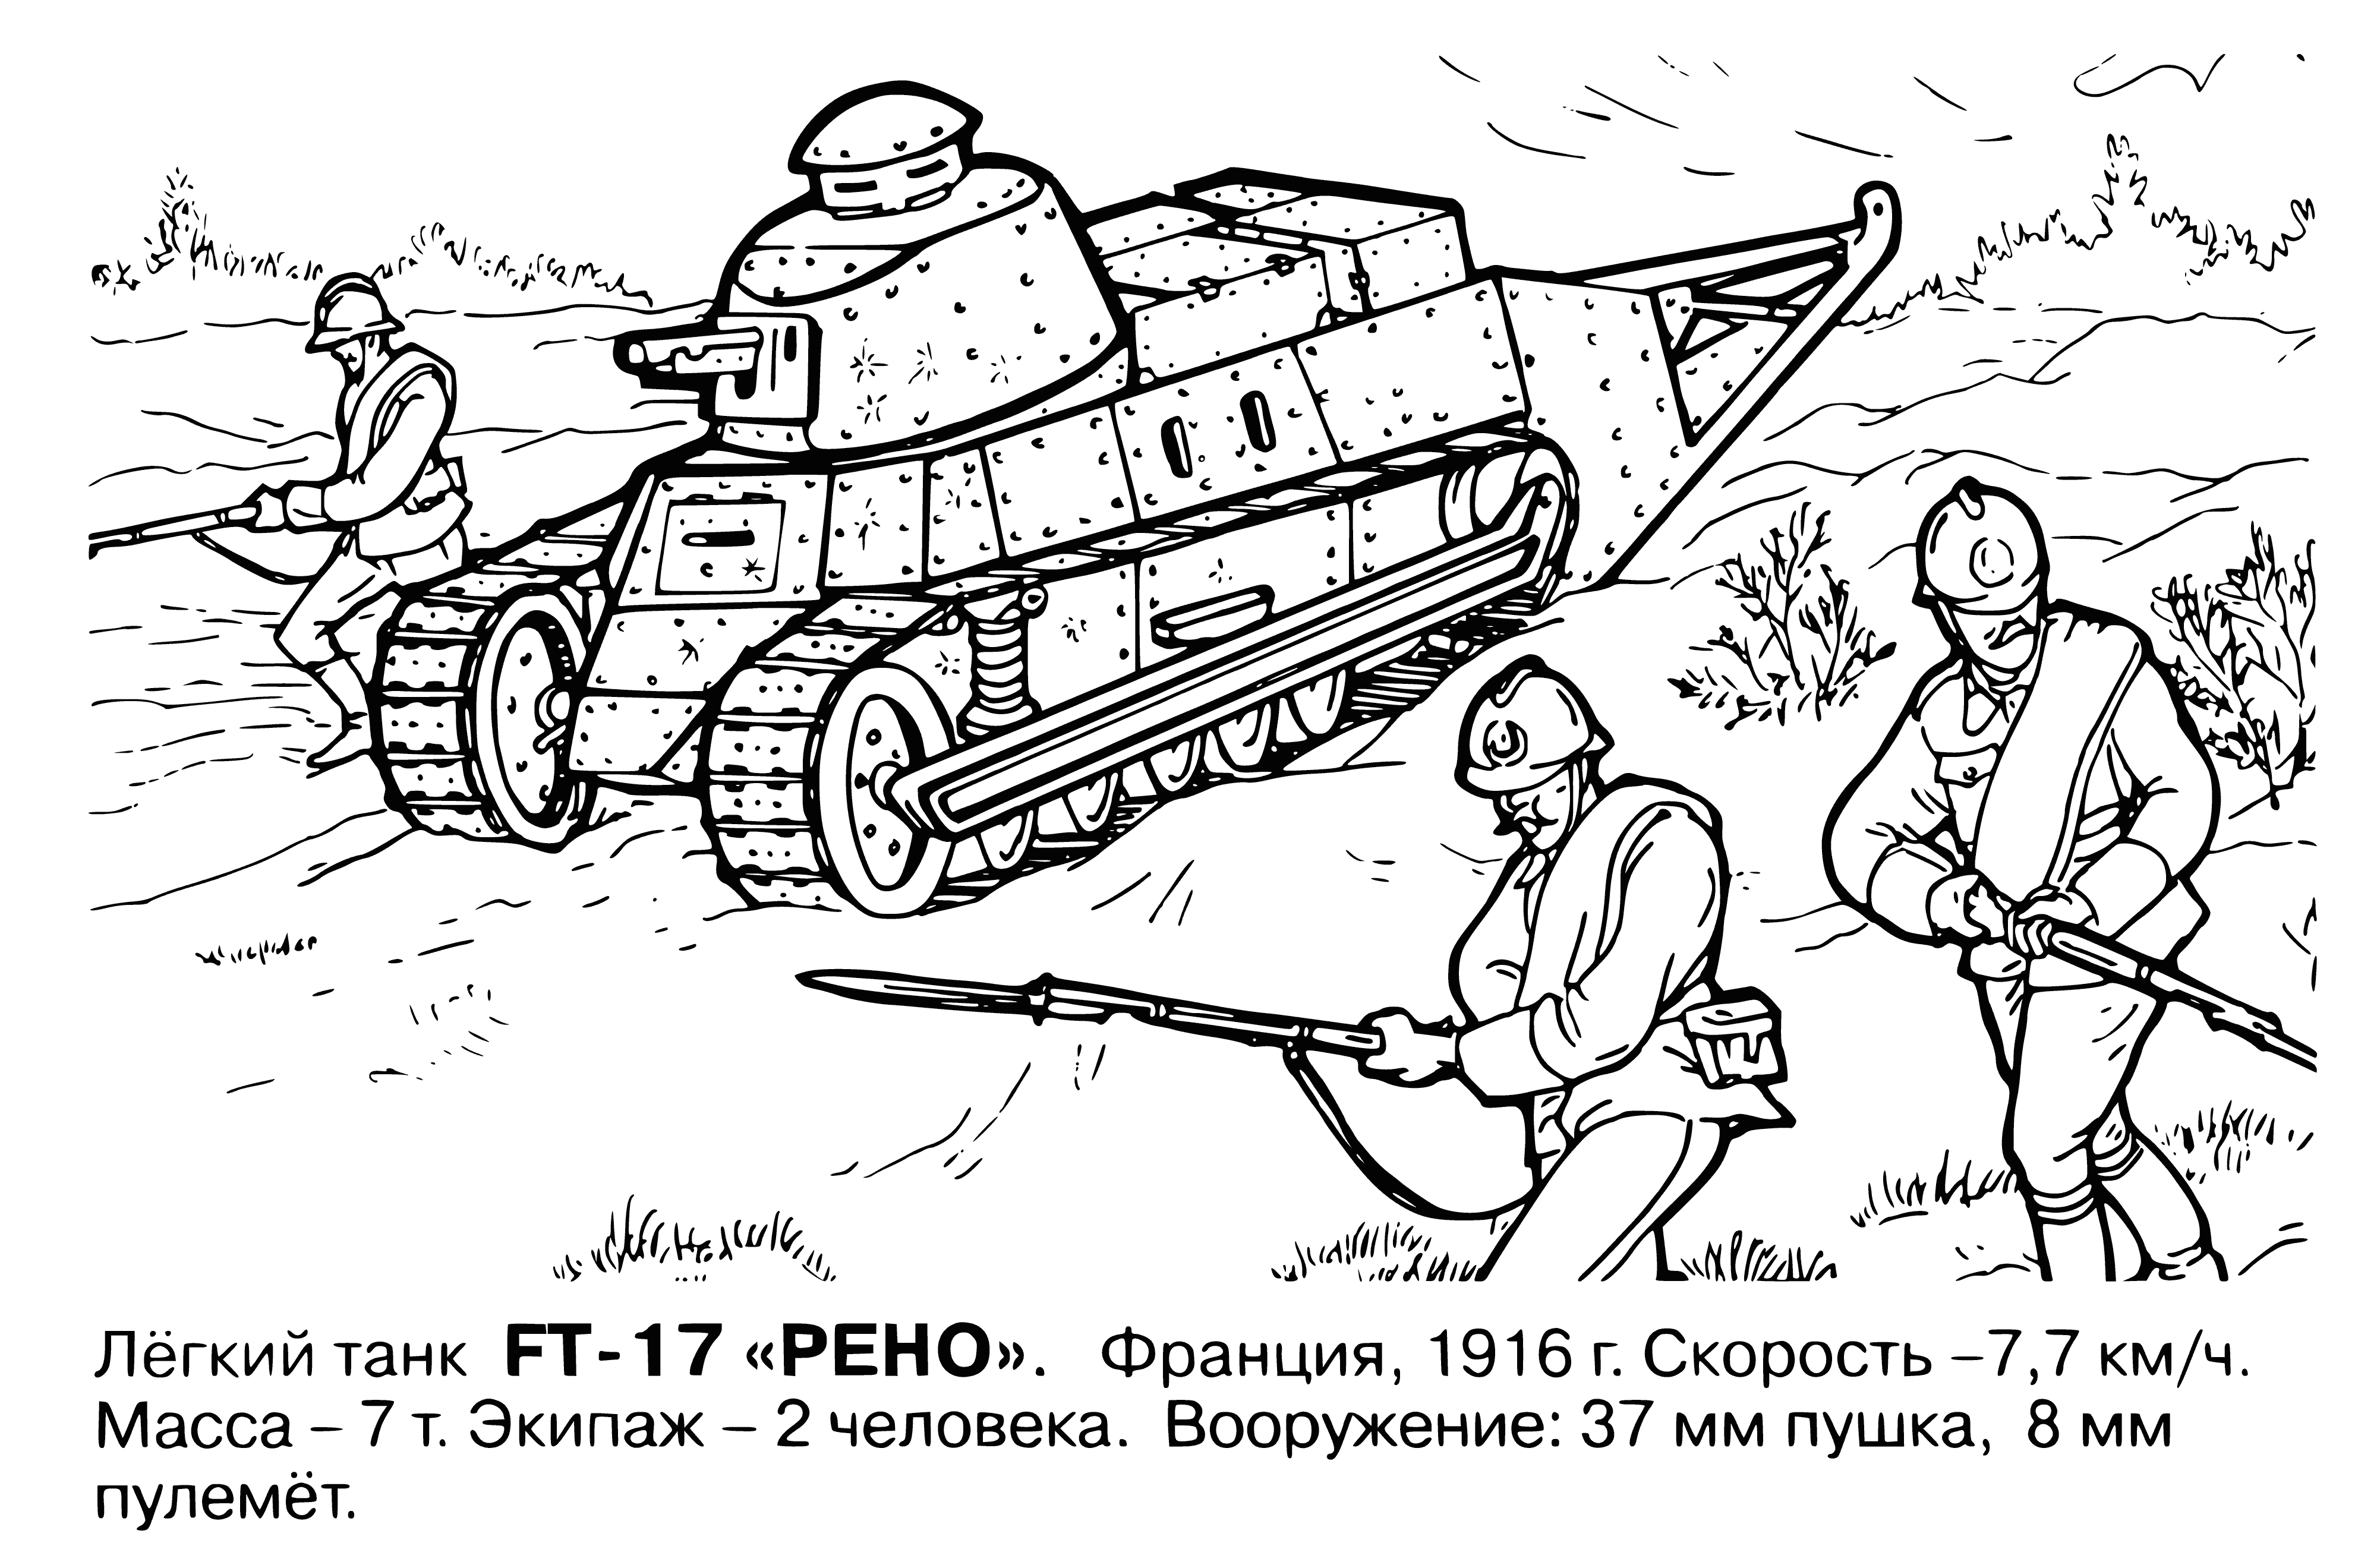 coloring page: Light tanks use mobility & smaller arms to scout, respond quickly to threats, & provide protection for heavier tanks.